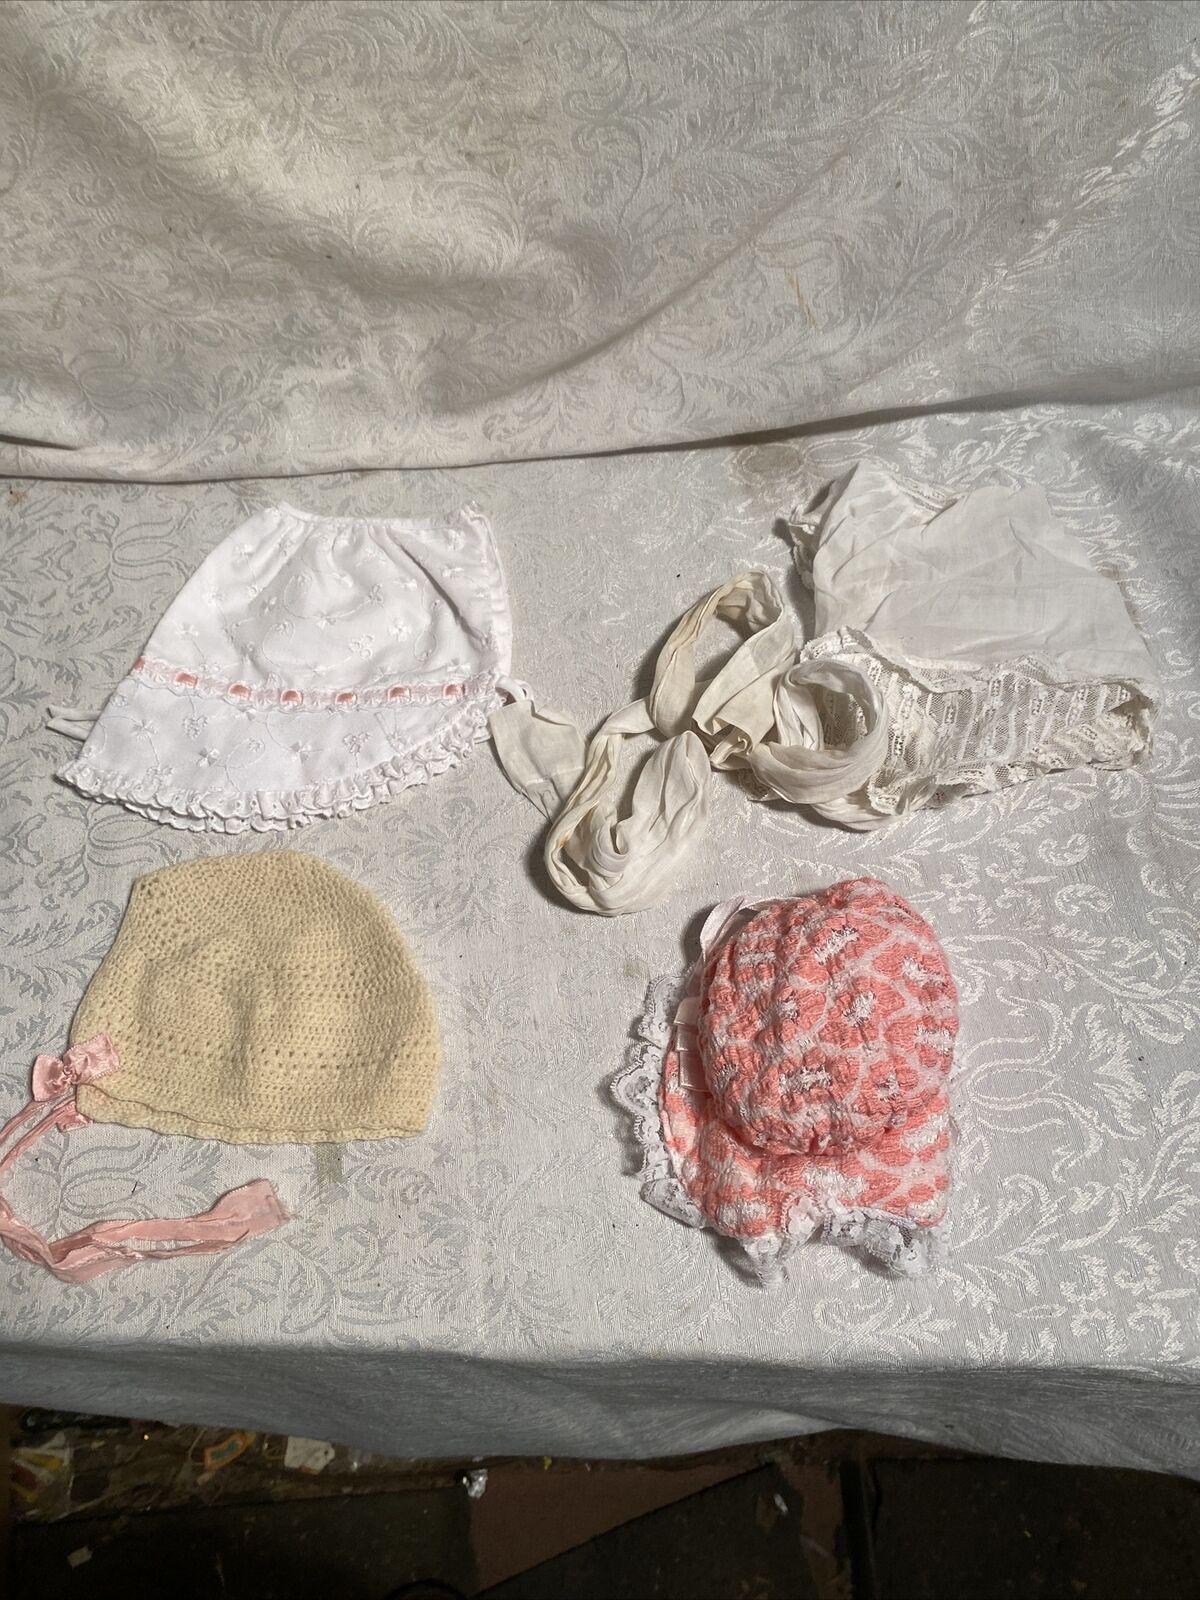 Vintage Lace Baby Or Doll Bonnet Cap Hat Christening Lot Of 4 #7